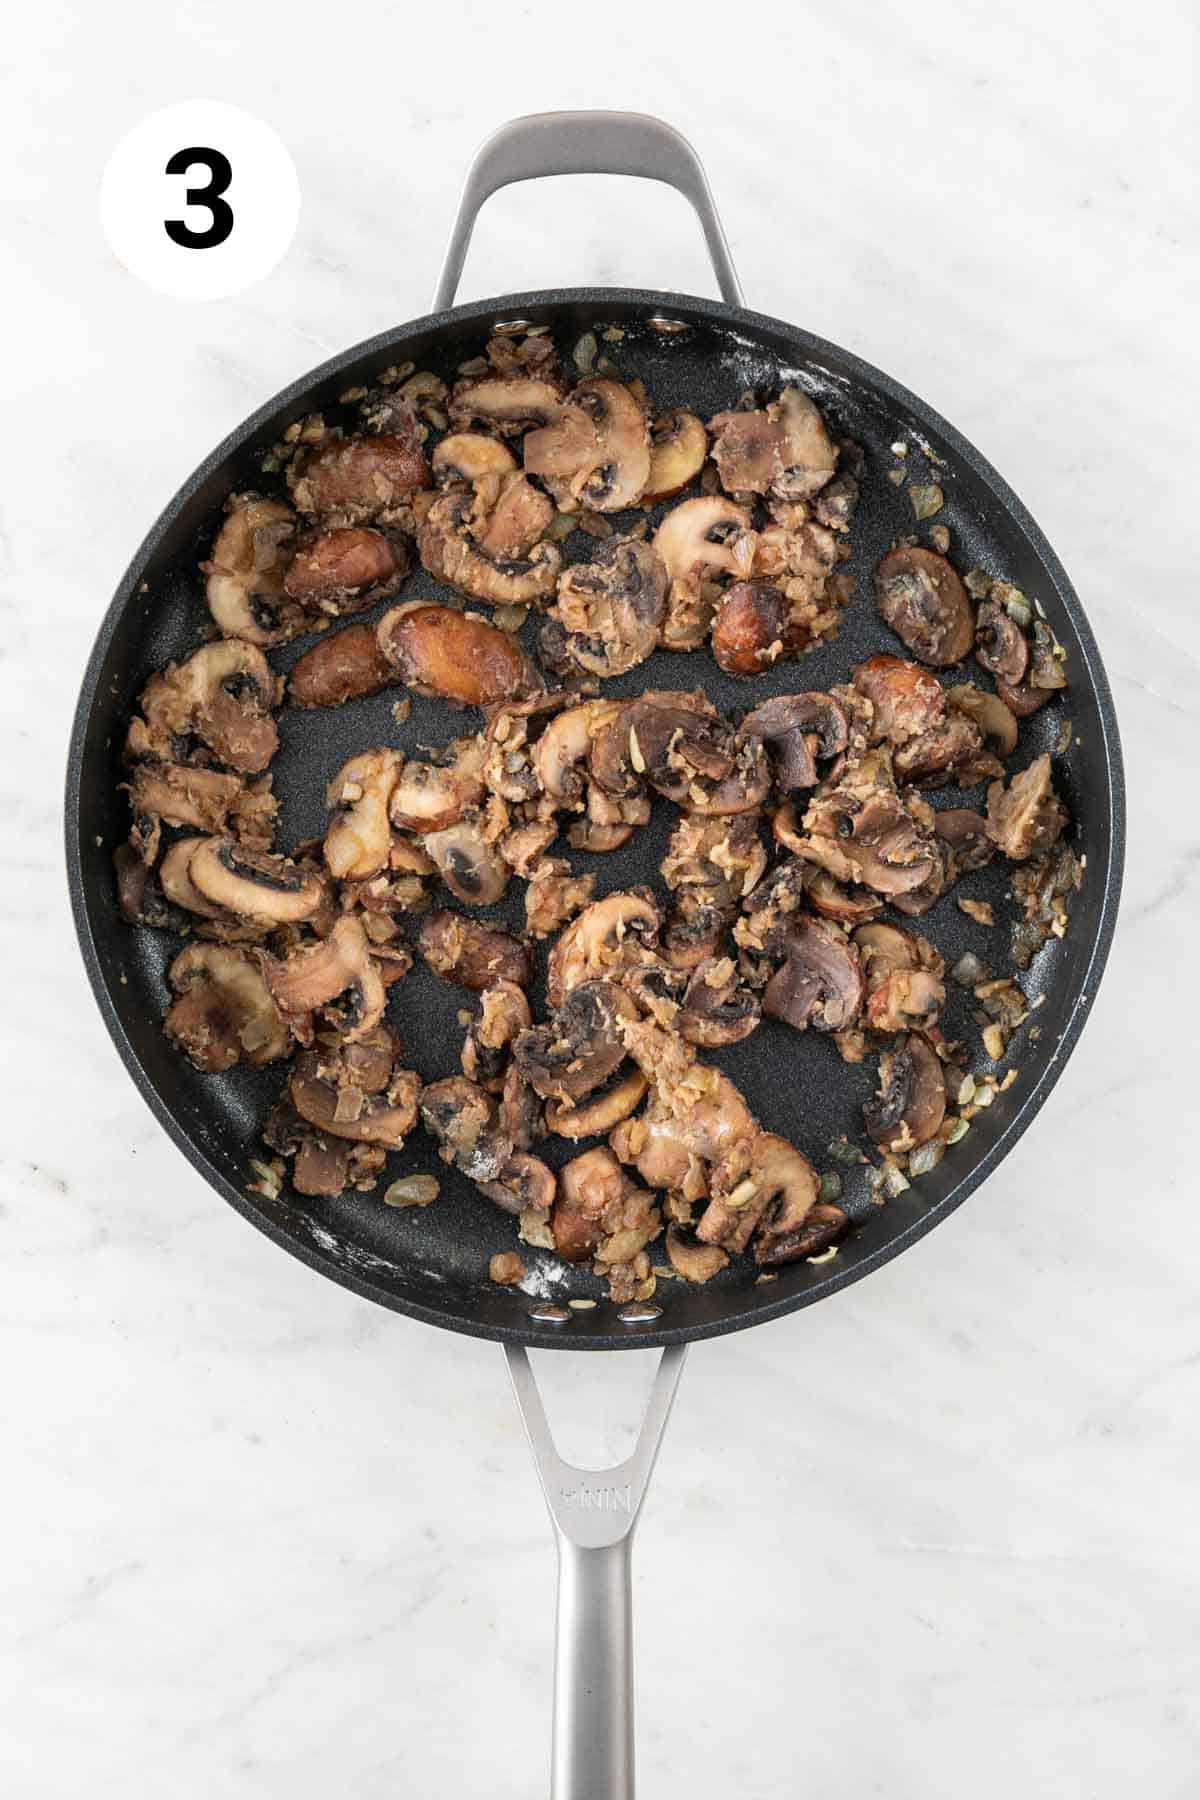 Onion, garlic, and mushrooms sautéed in a skillet with flour.